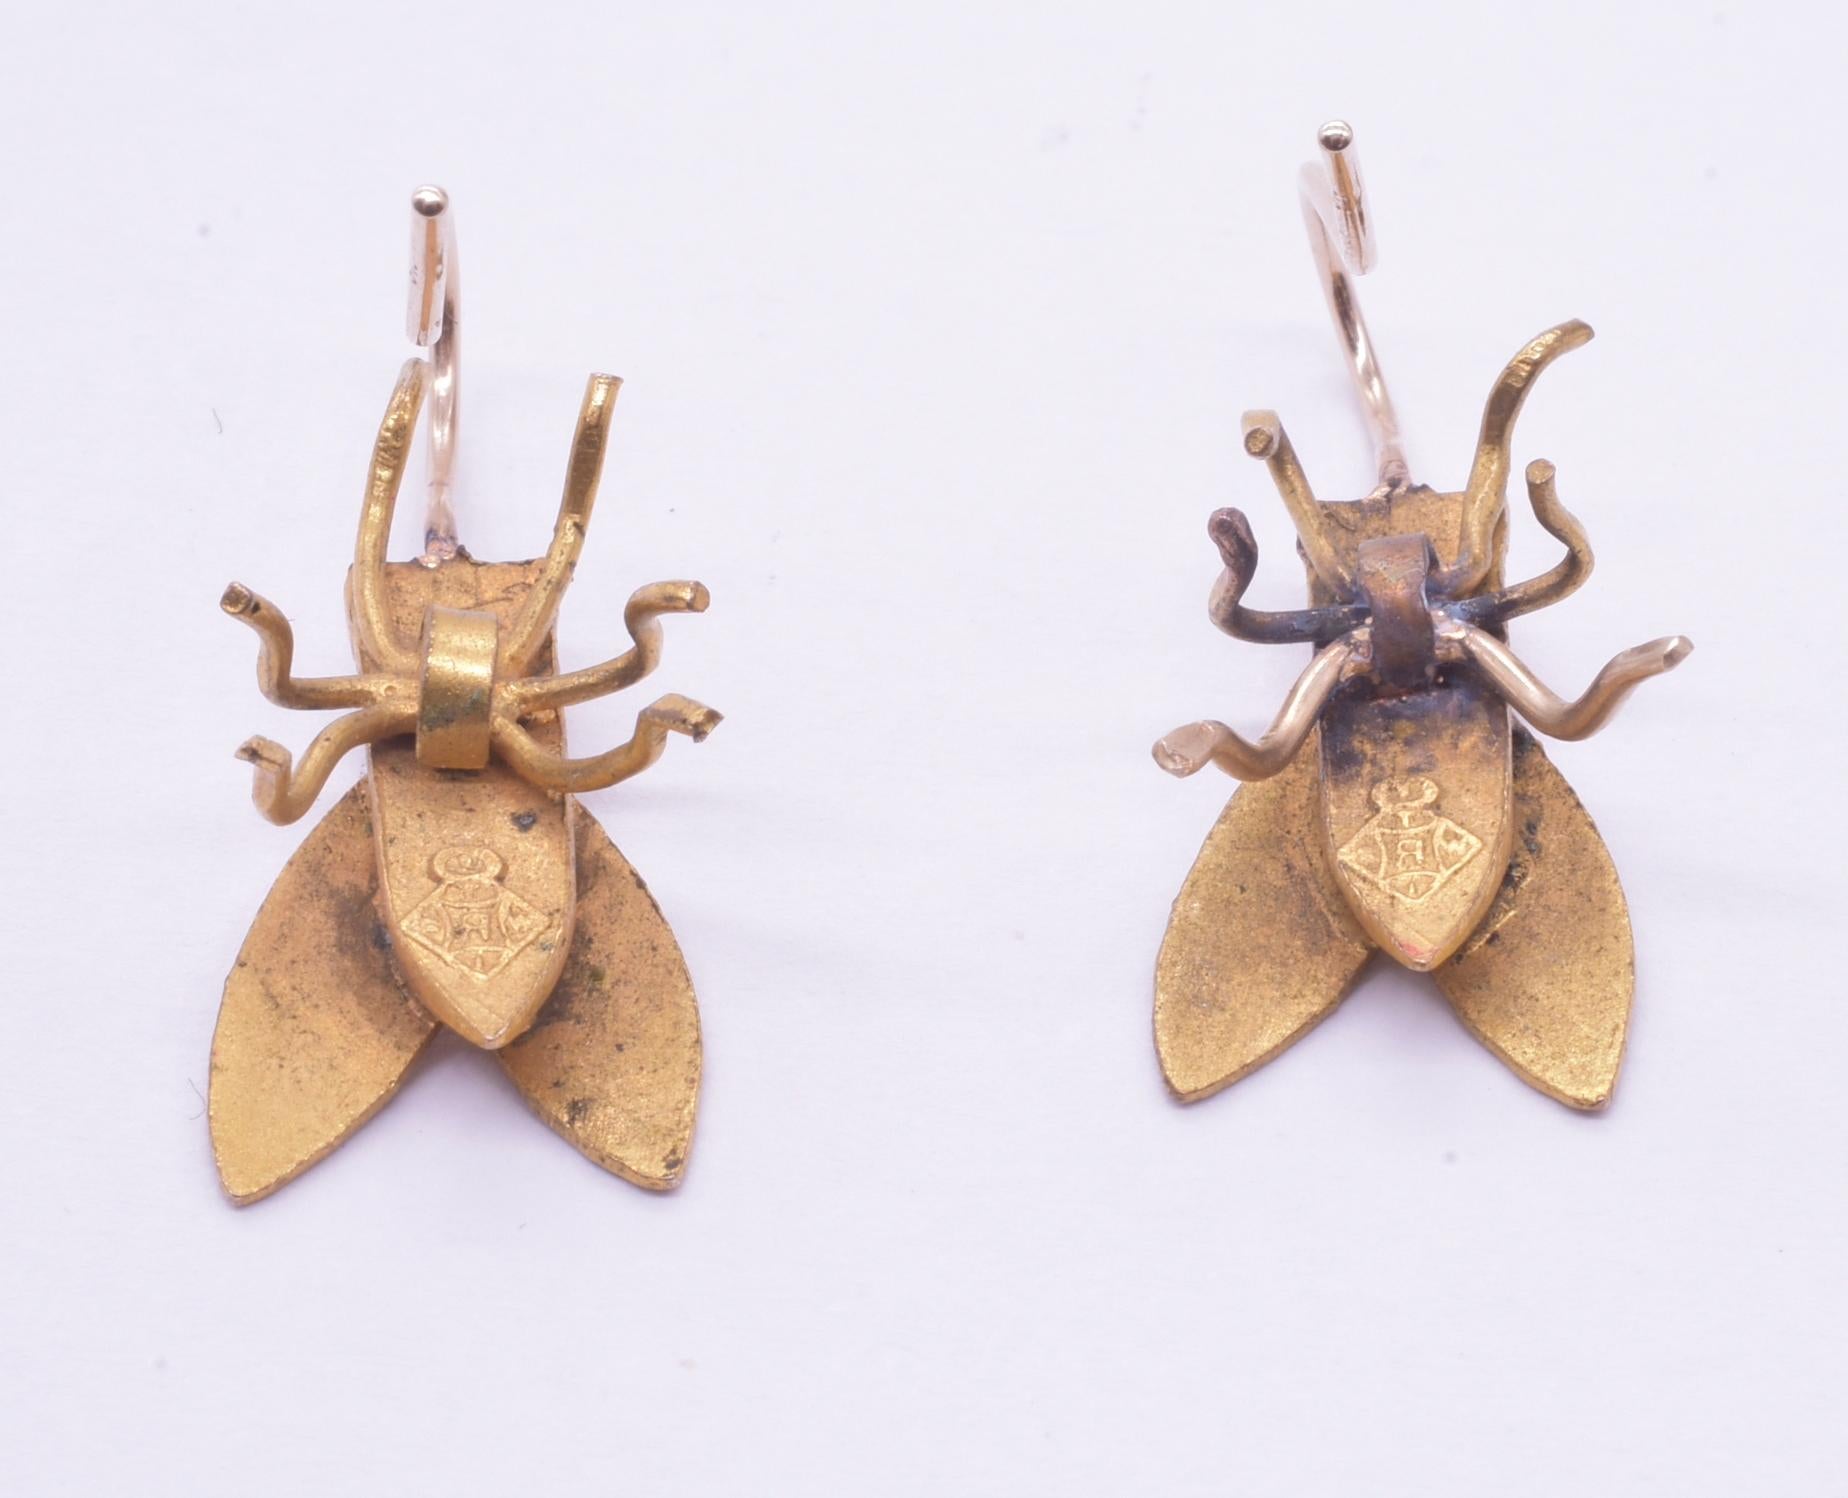 We love these 20 mm long fun fly earrings made of various metals. They are quite realistic with their textured bodies, membranous wings and bulbous eyes. The fly earrings perch on realistic looking wire legs and attach to 9K (marked) shepherd's